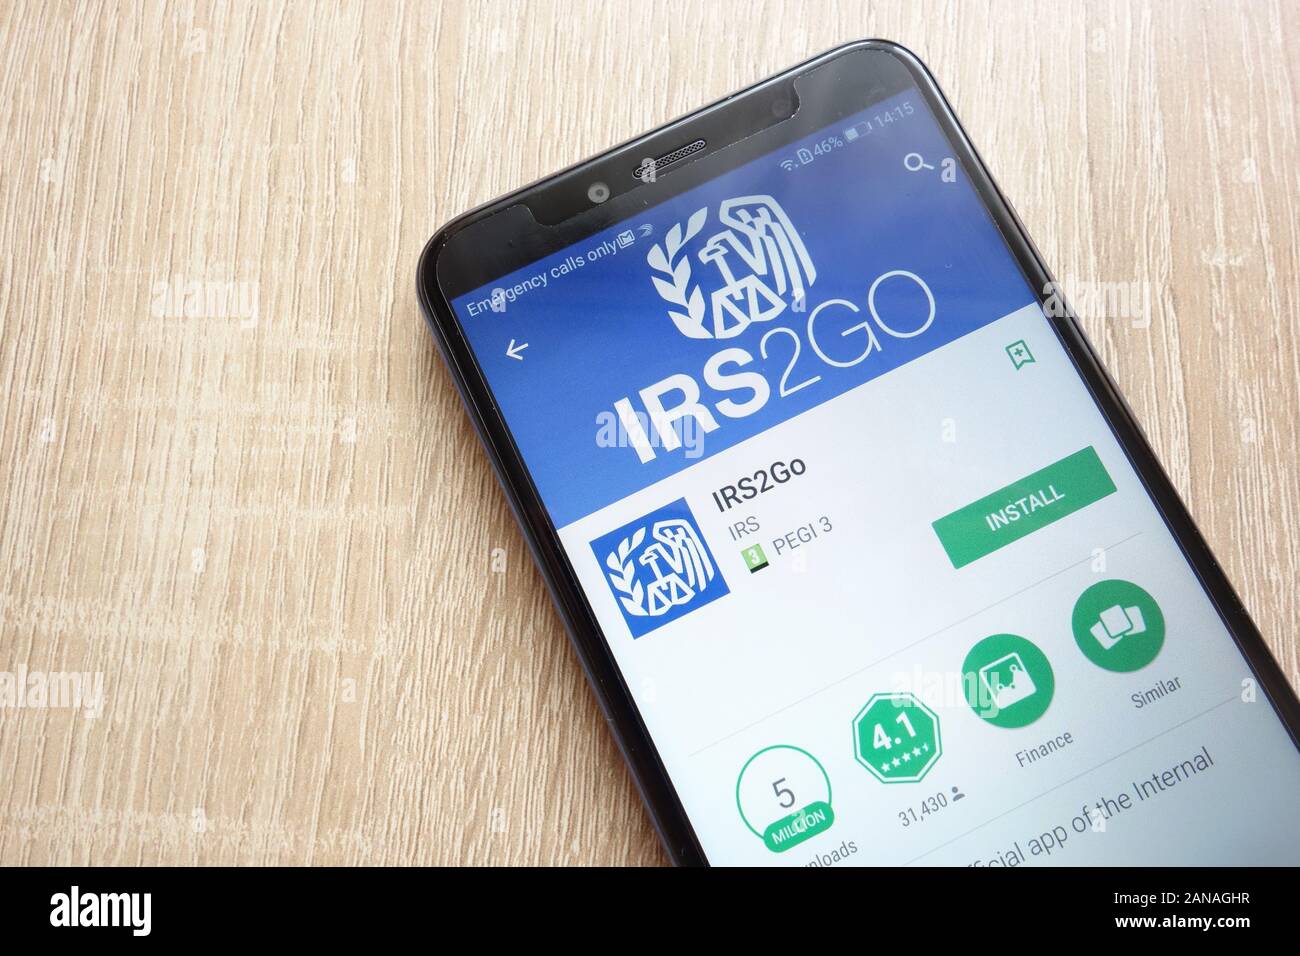 IRS2Go app on Google Play Store website displayed on Huawei Y6 2018 smartphone Stock Photo